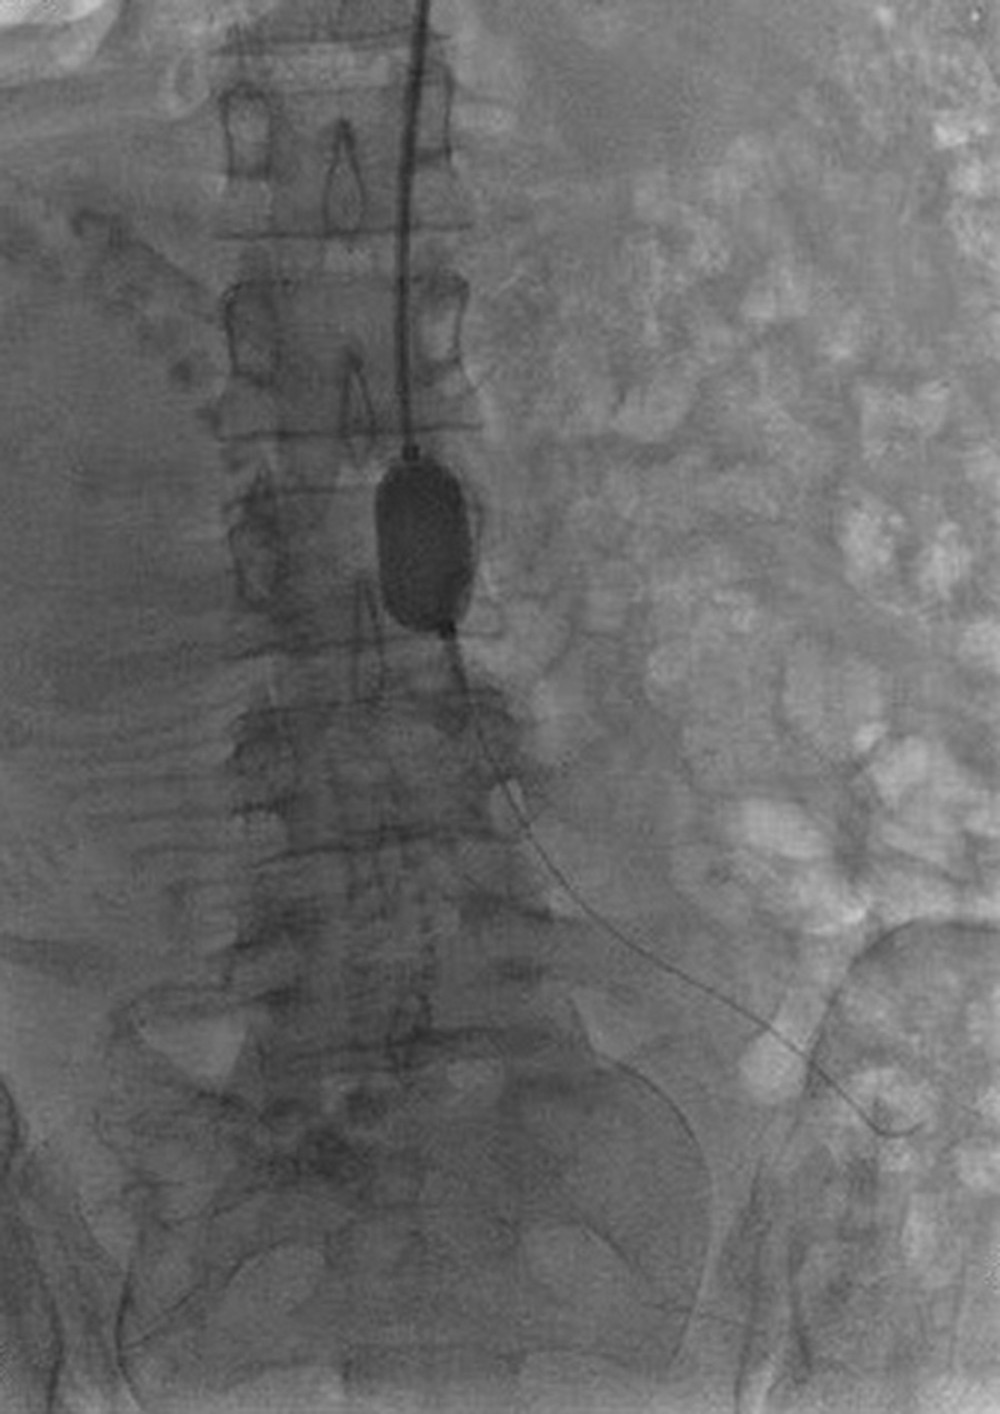 The image shows the filled balloon blocking the abdominal aorta.